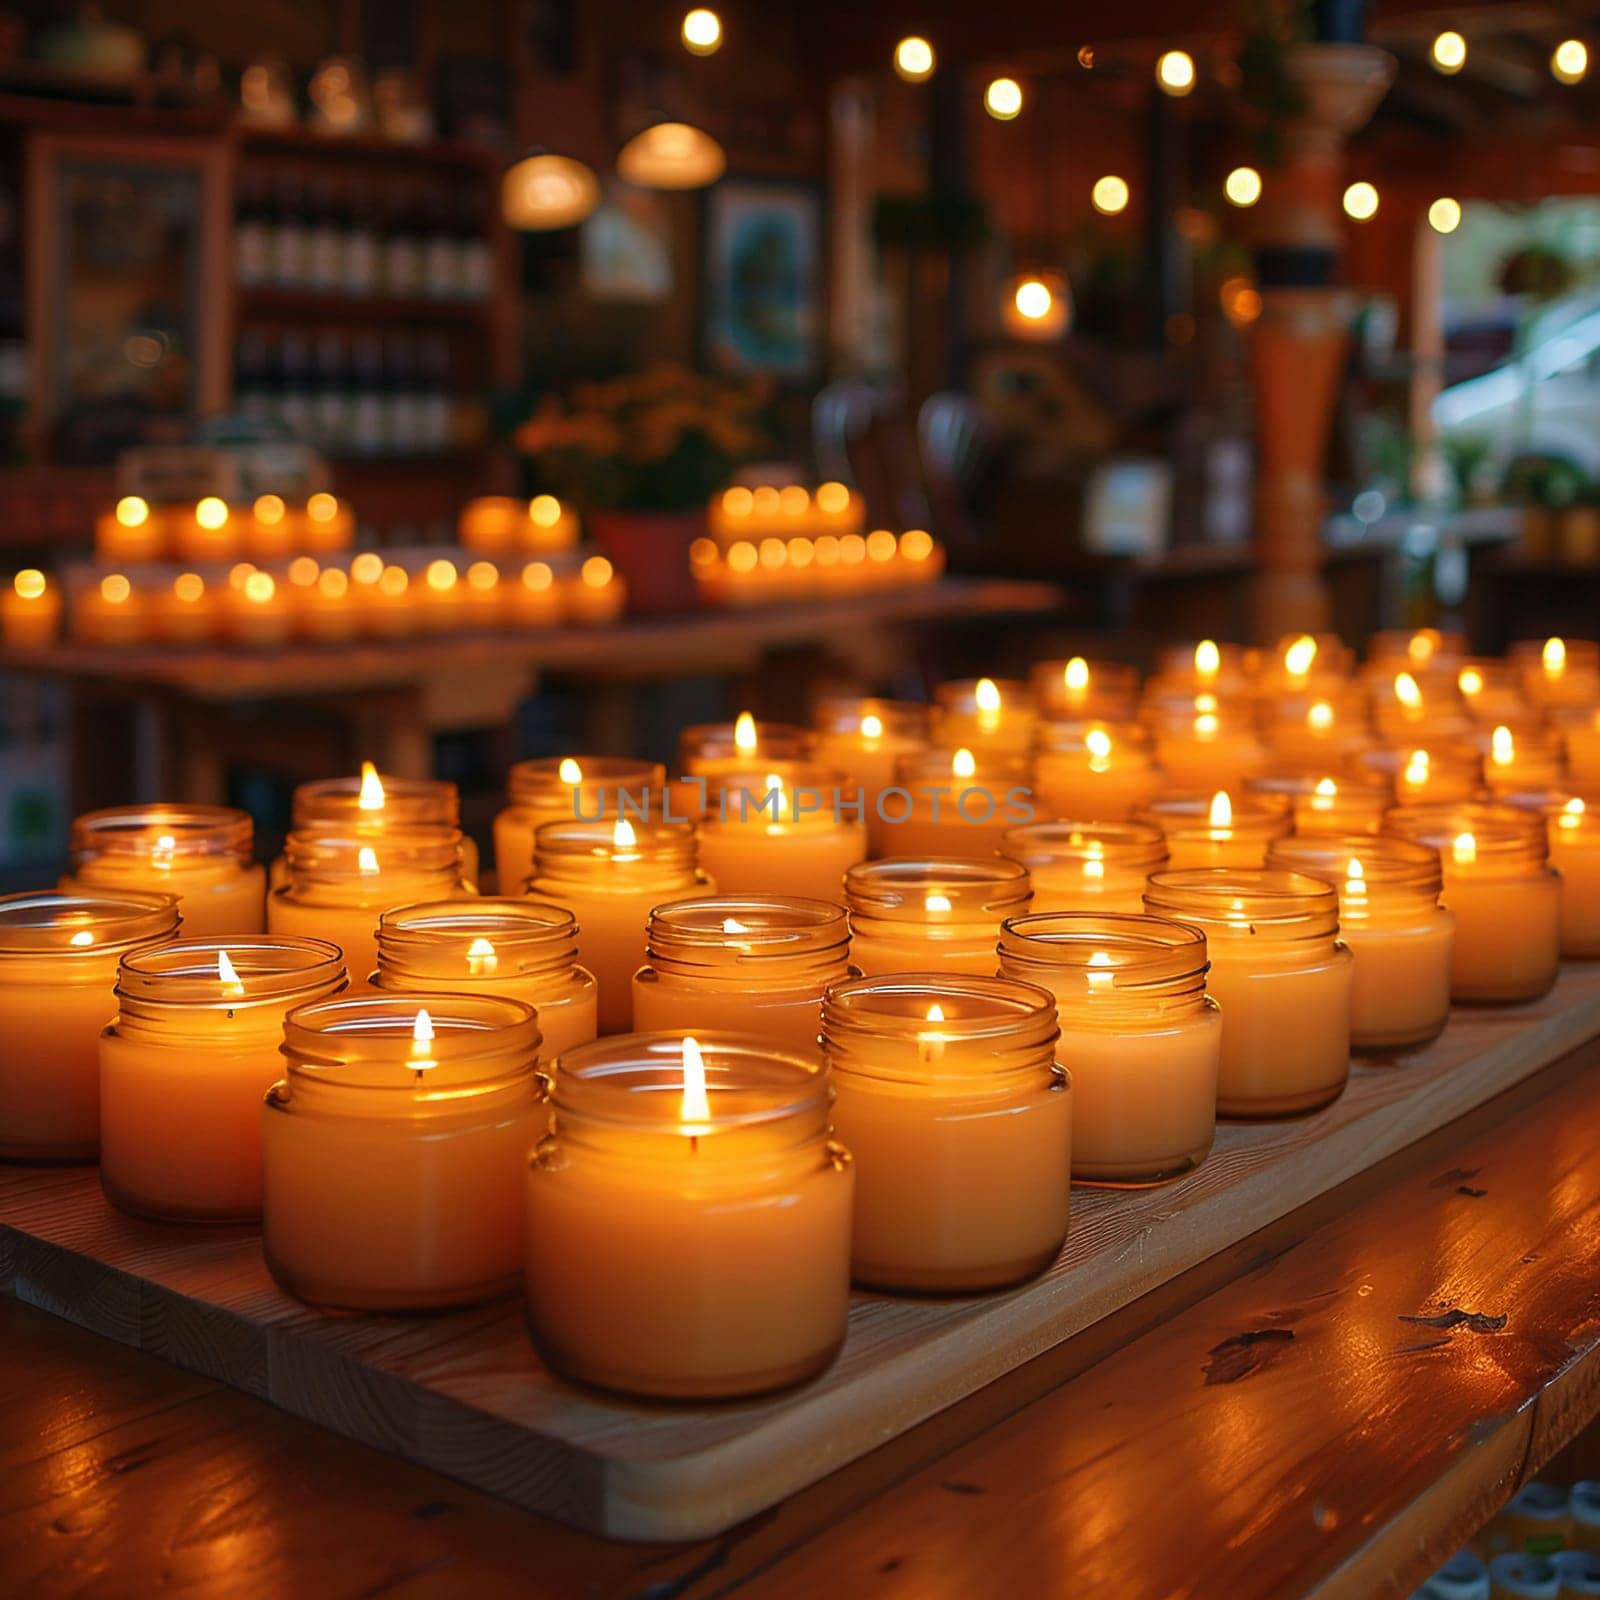 Candle Making Illuminates the Art of Ambiance in Business of Home Decor, Wax pots and fragrance oils light a story of atmosphere and craft in the candle making business.